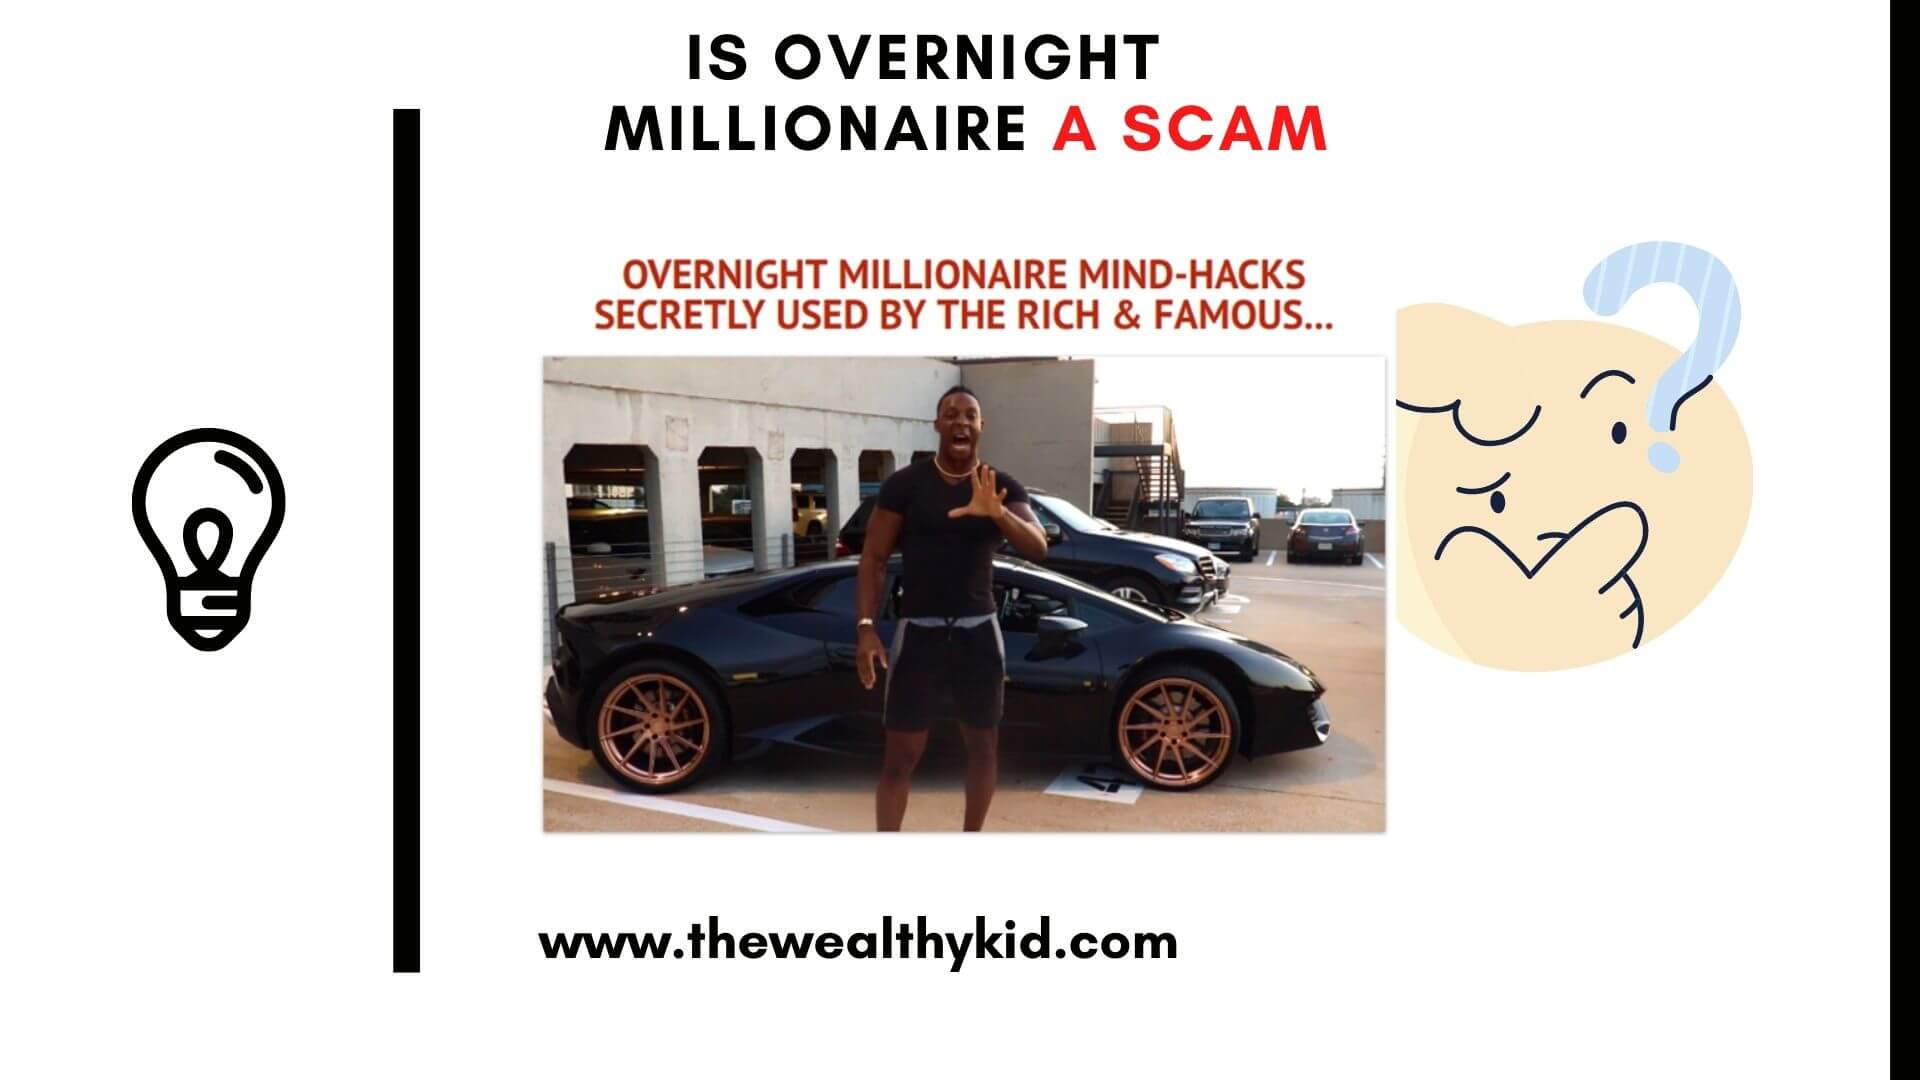 Is Overnight Millionaire a scam